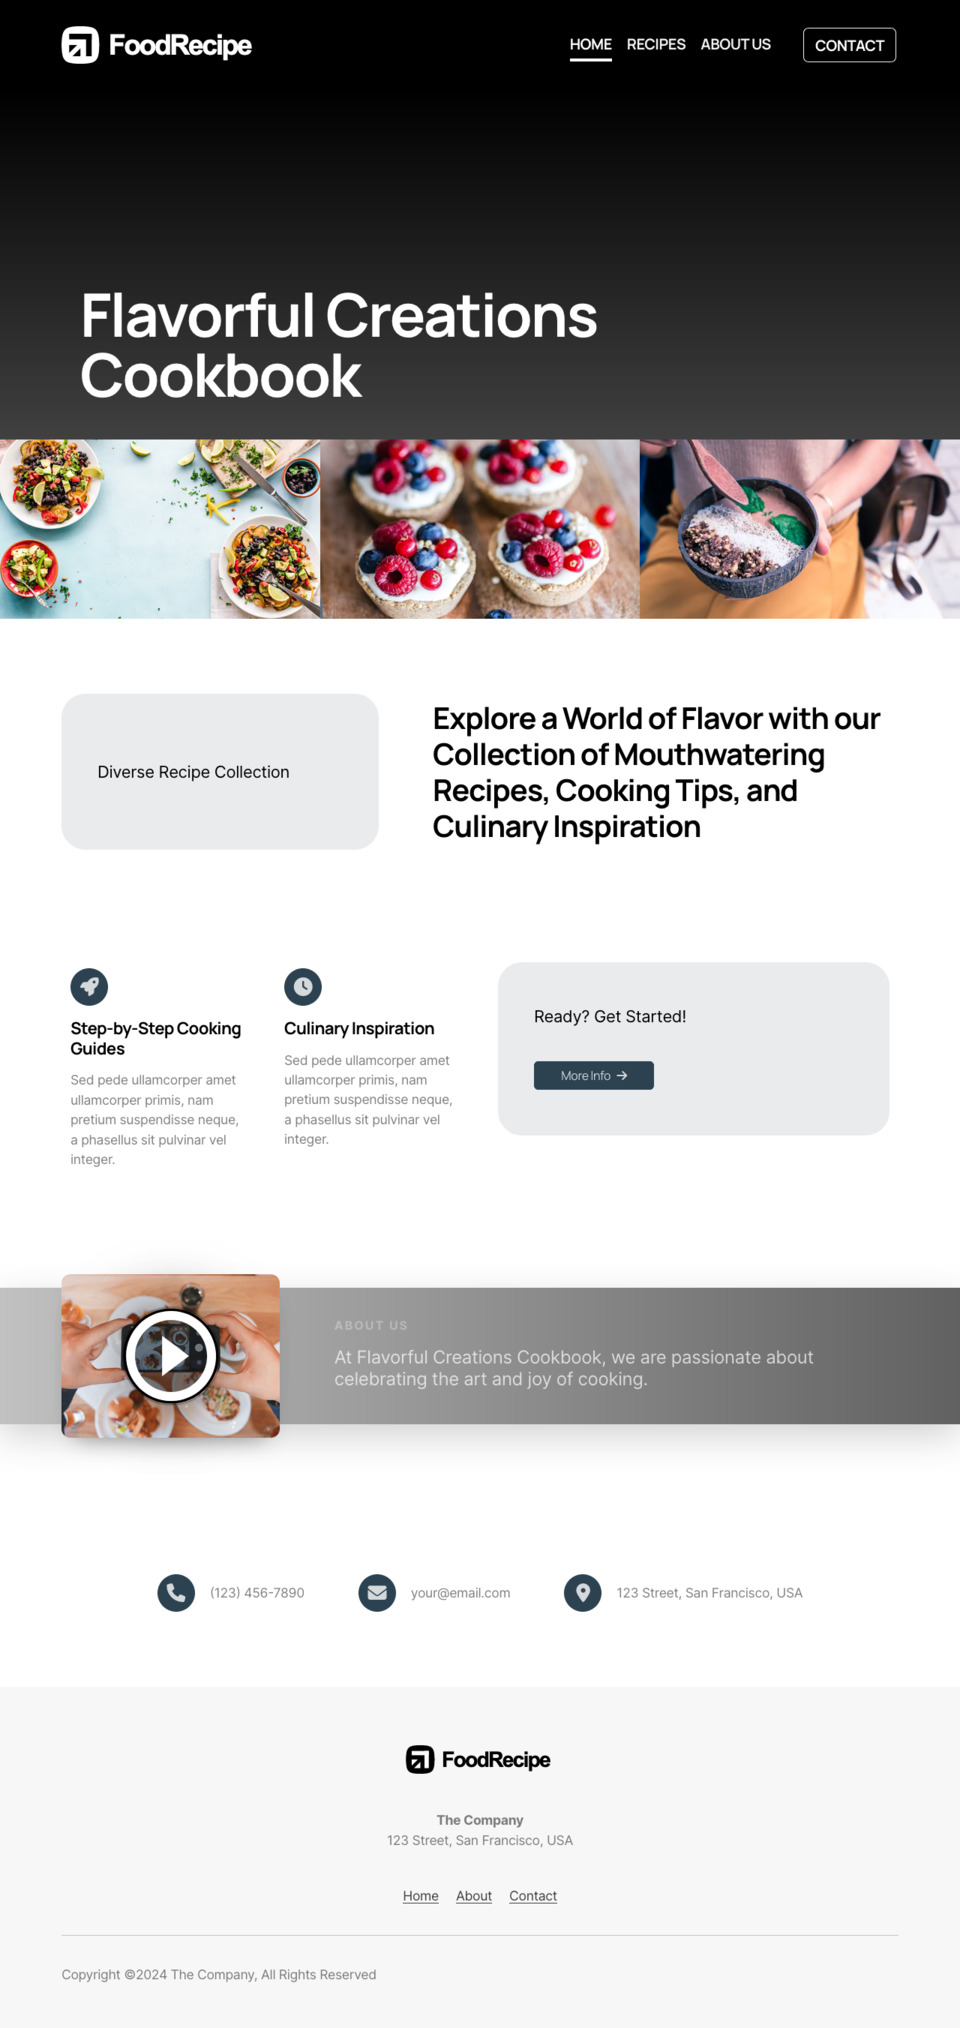 Food Recipe Website Template - Food bloggers, restaurants, meal planners, cooking enthusiasts